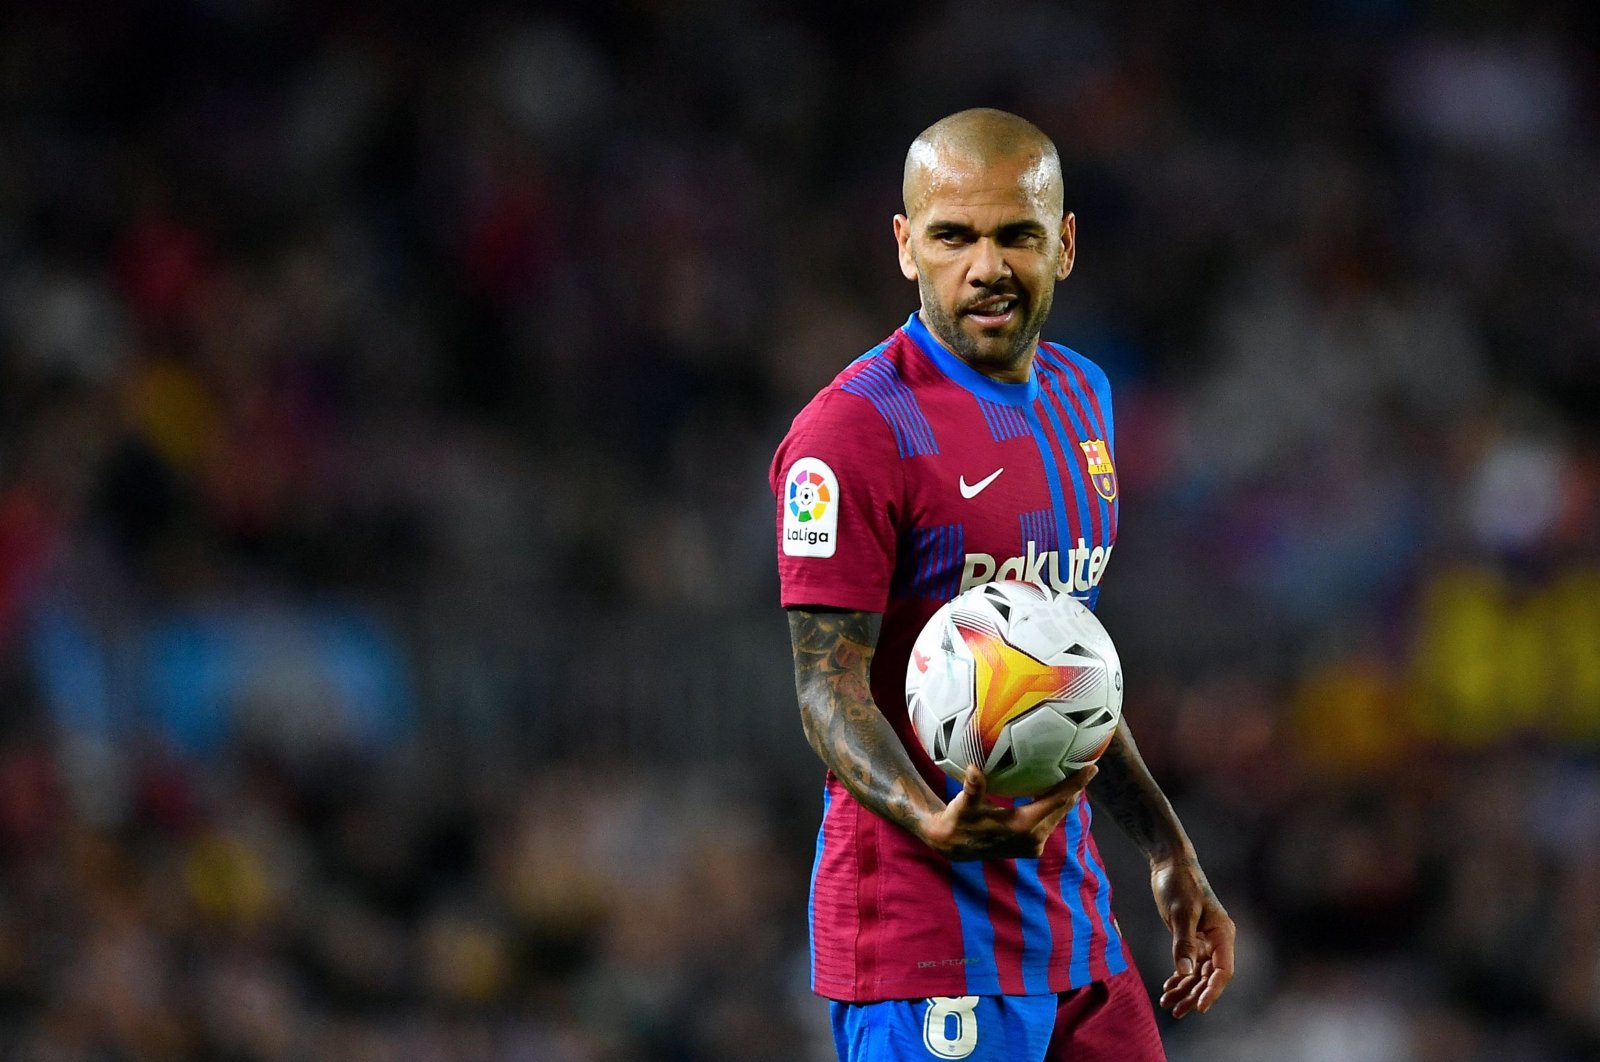 Former Barcelona defender Dani Alves holds the ball during the Spanish League football match against Mallorca, Camp Nou stadium, Barcelona, Spain, May 1, 2022. (AFP Photo)